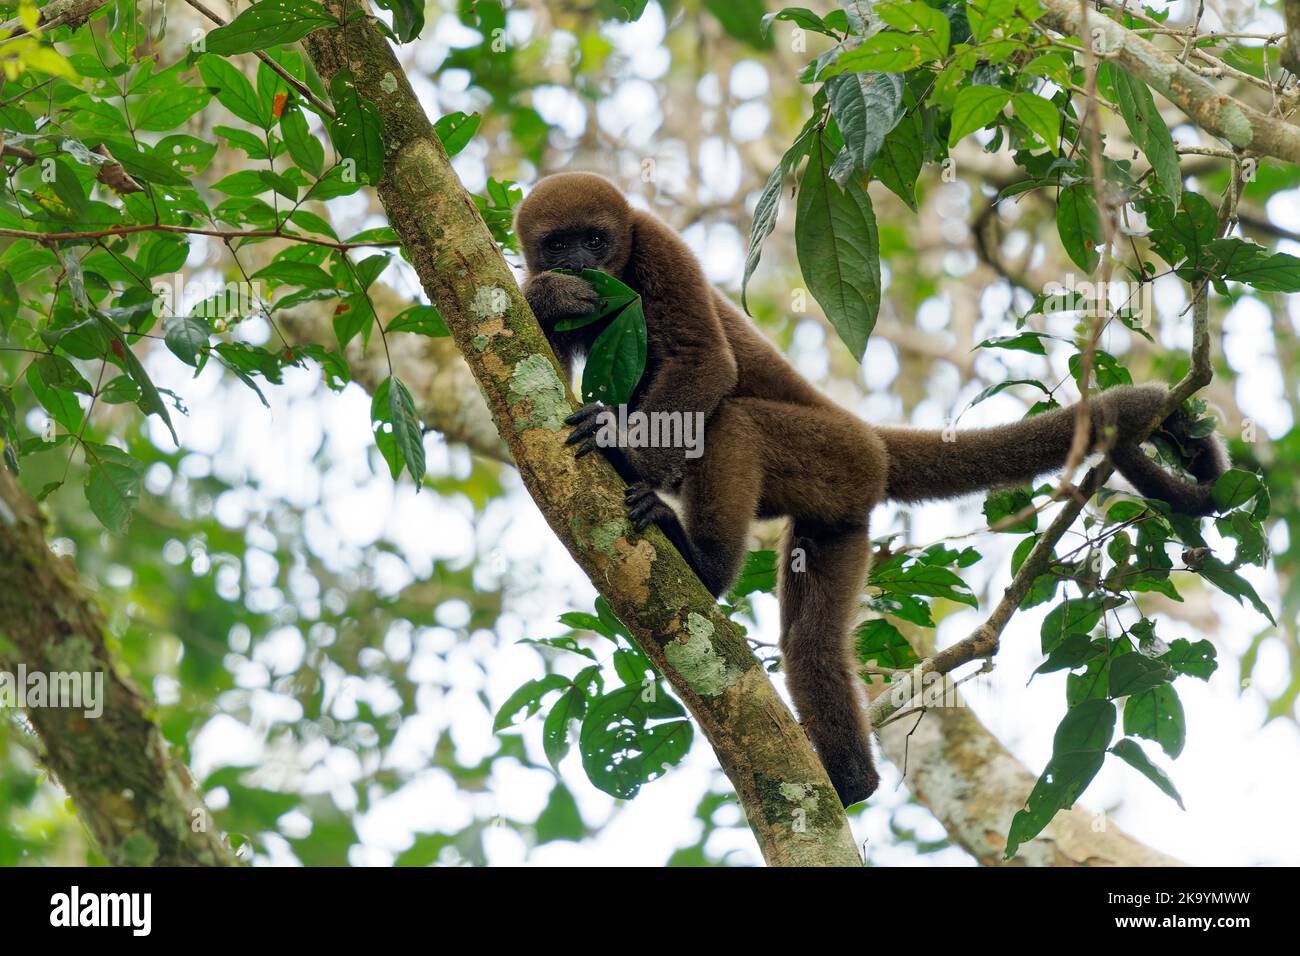 Common Woolly Monkey or Brown or Humboldt's woolly monkey (Lagothrix lagothricha) from South America in Colombia, Ecuador, Peru, Bolivia, Brazil and V Stock Photo